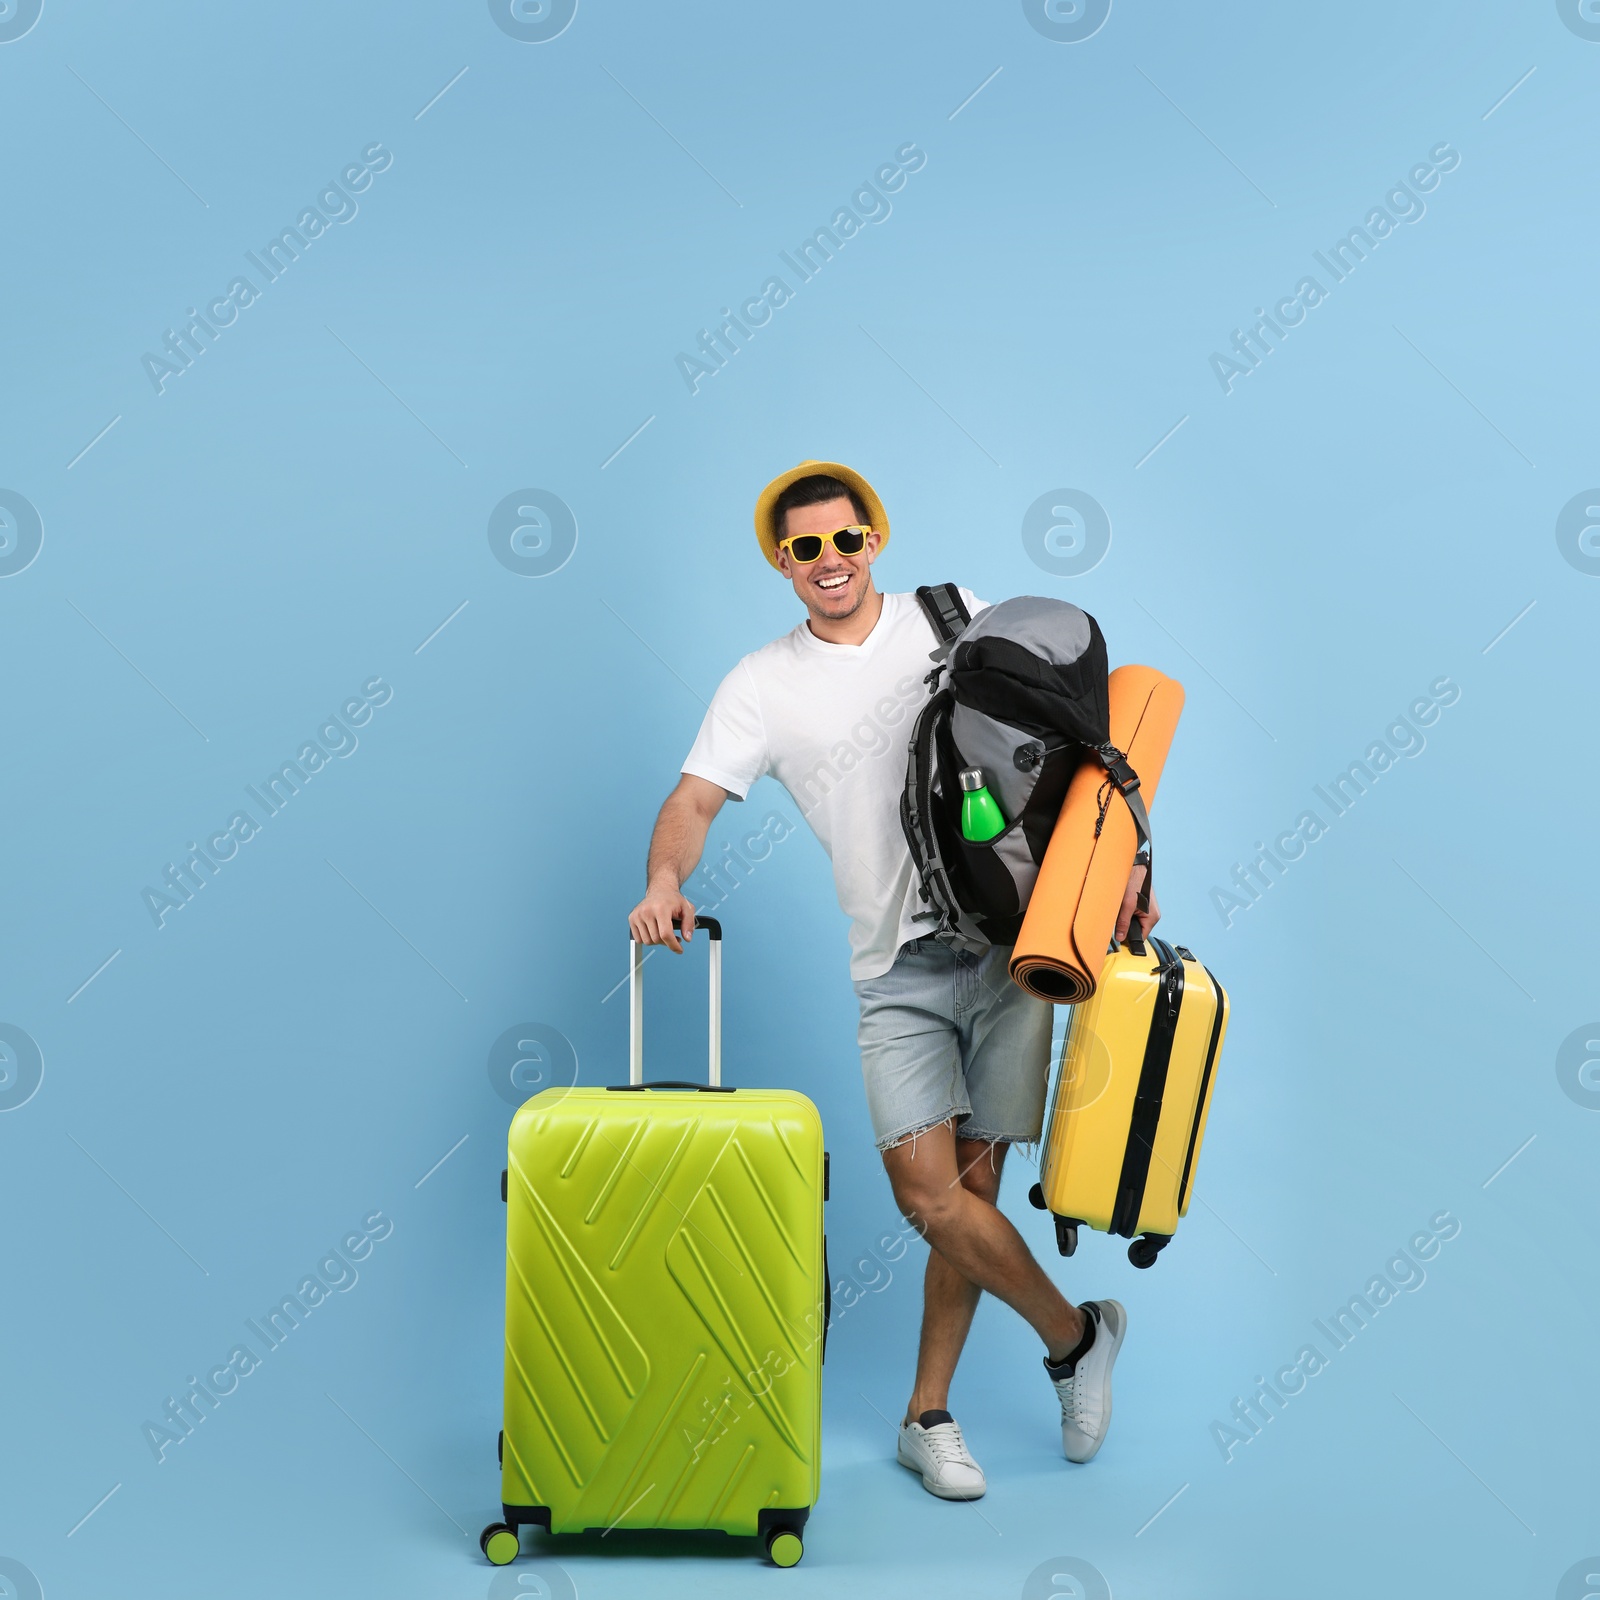 Photo of Male tourist with travel backpack and suitcases on turquoise background